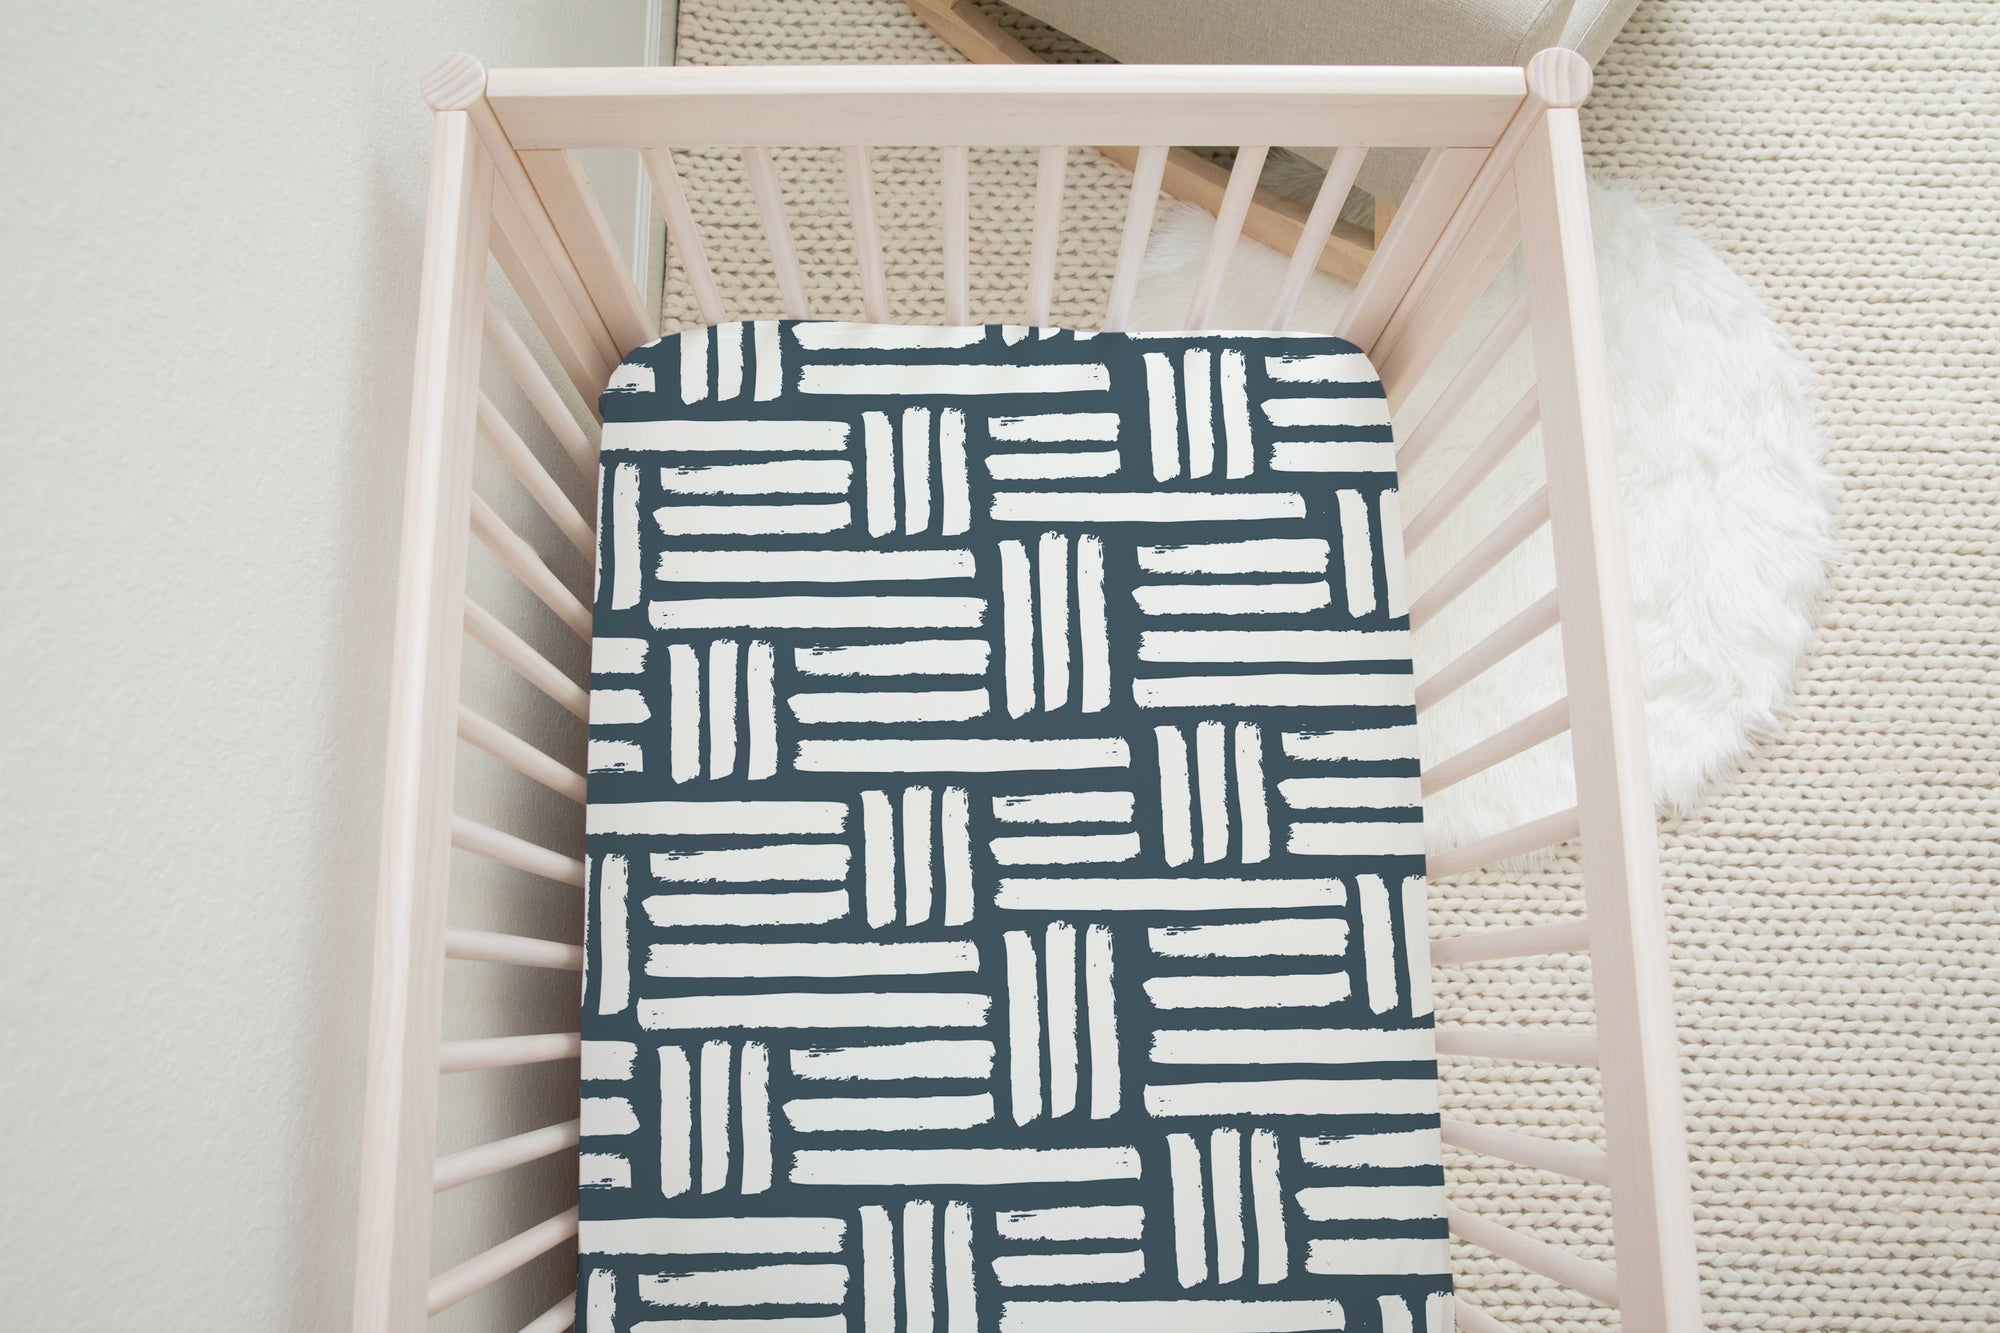 boo and rook checkered stripe crib sheet, gender neutral nursery decor navy blue and white baby shower gift